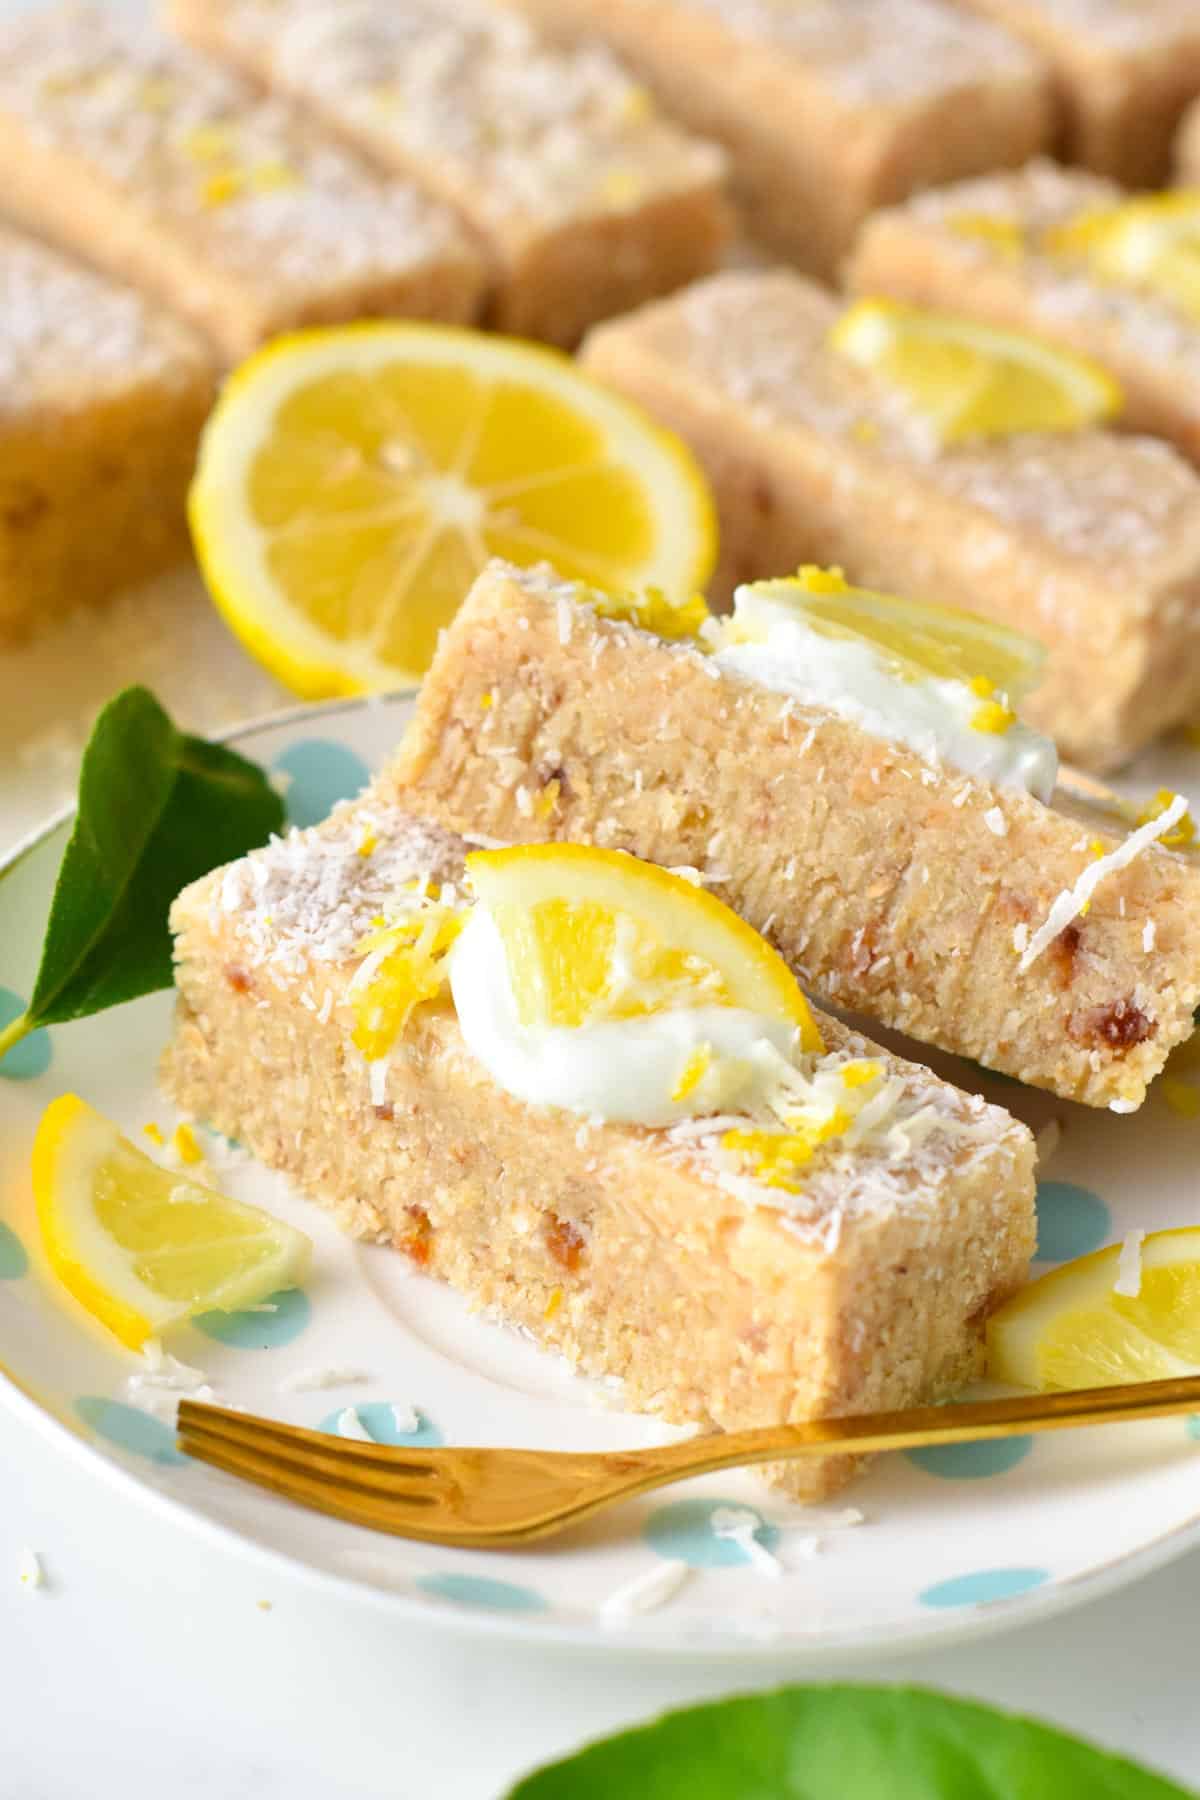 This healthy lemon slice is an easy healthy no baked lemon dessert that is also refined sugar-free, dairy-free, and vegan.